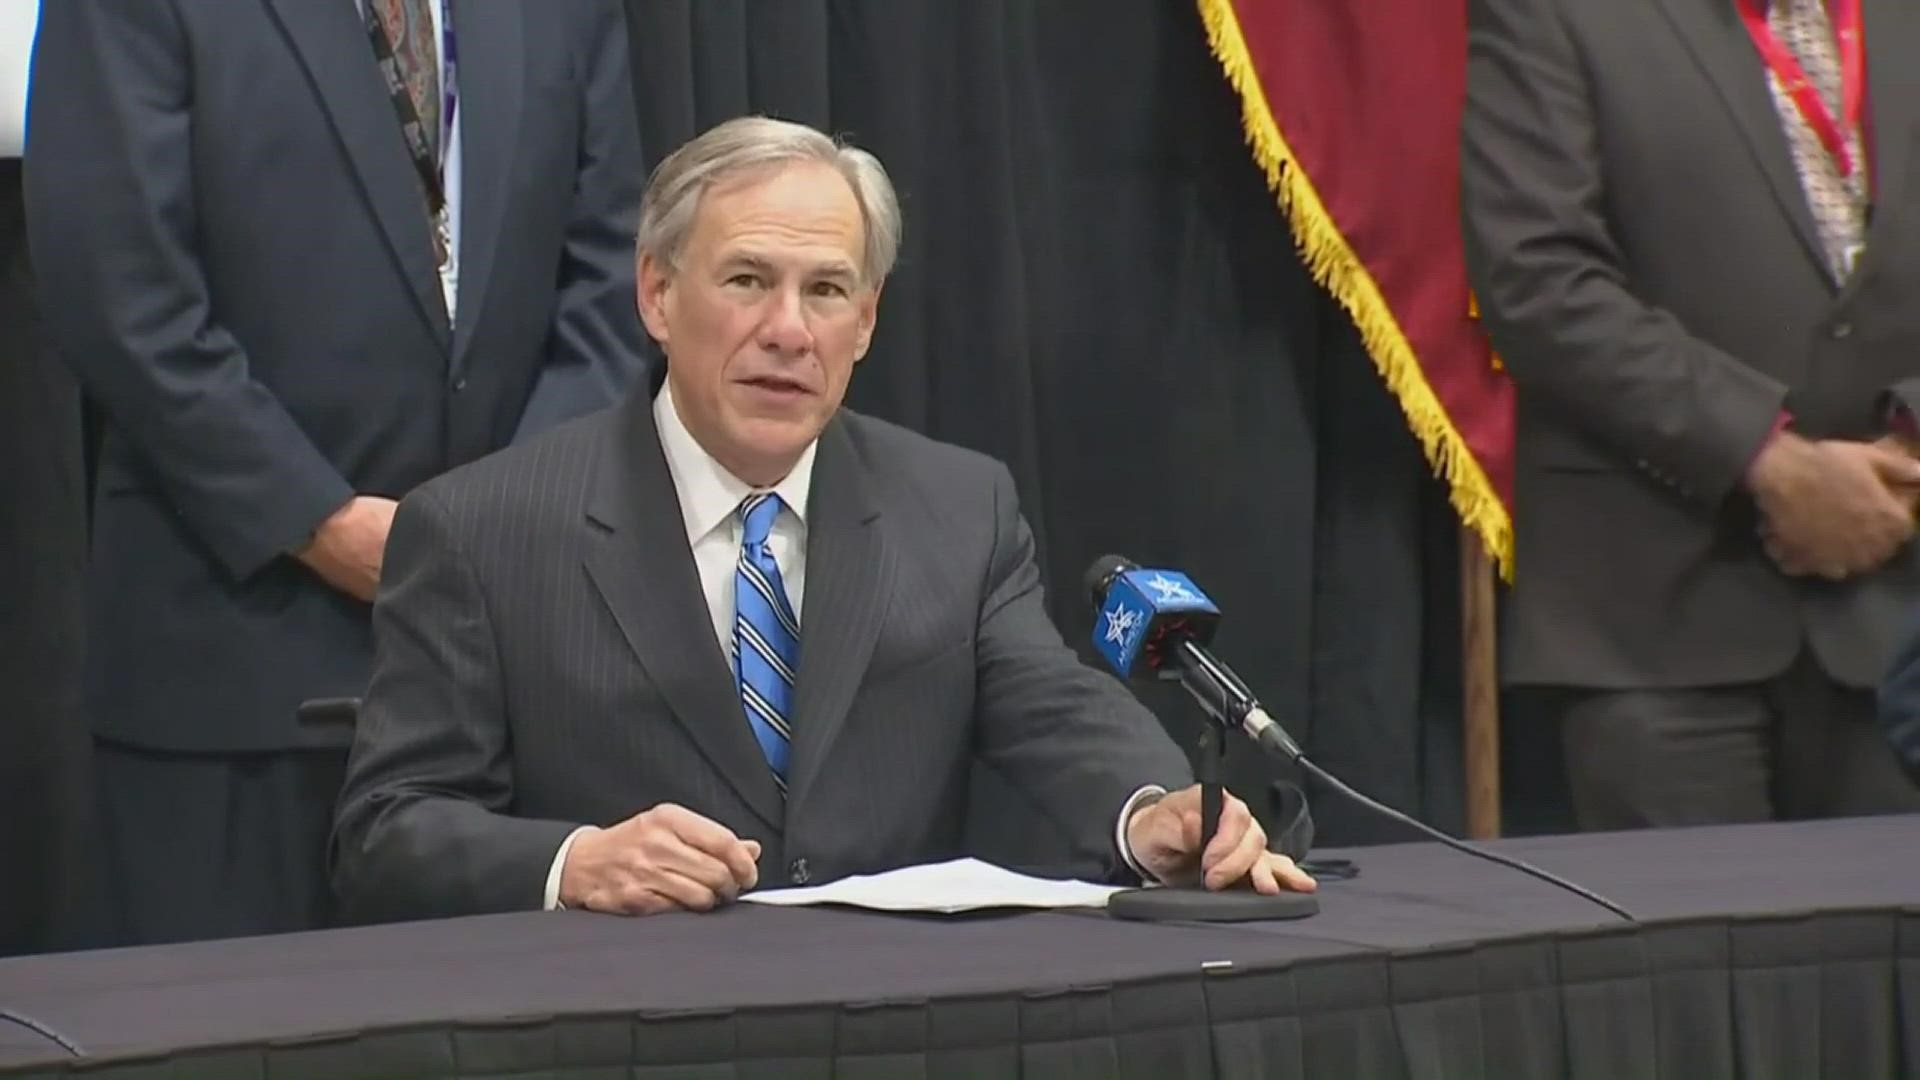 Gov. Greg Abbott joined other state and local leaders to tour a mass vaccination site in Arlington before providing an update on efforts across the state.